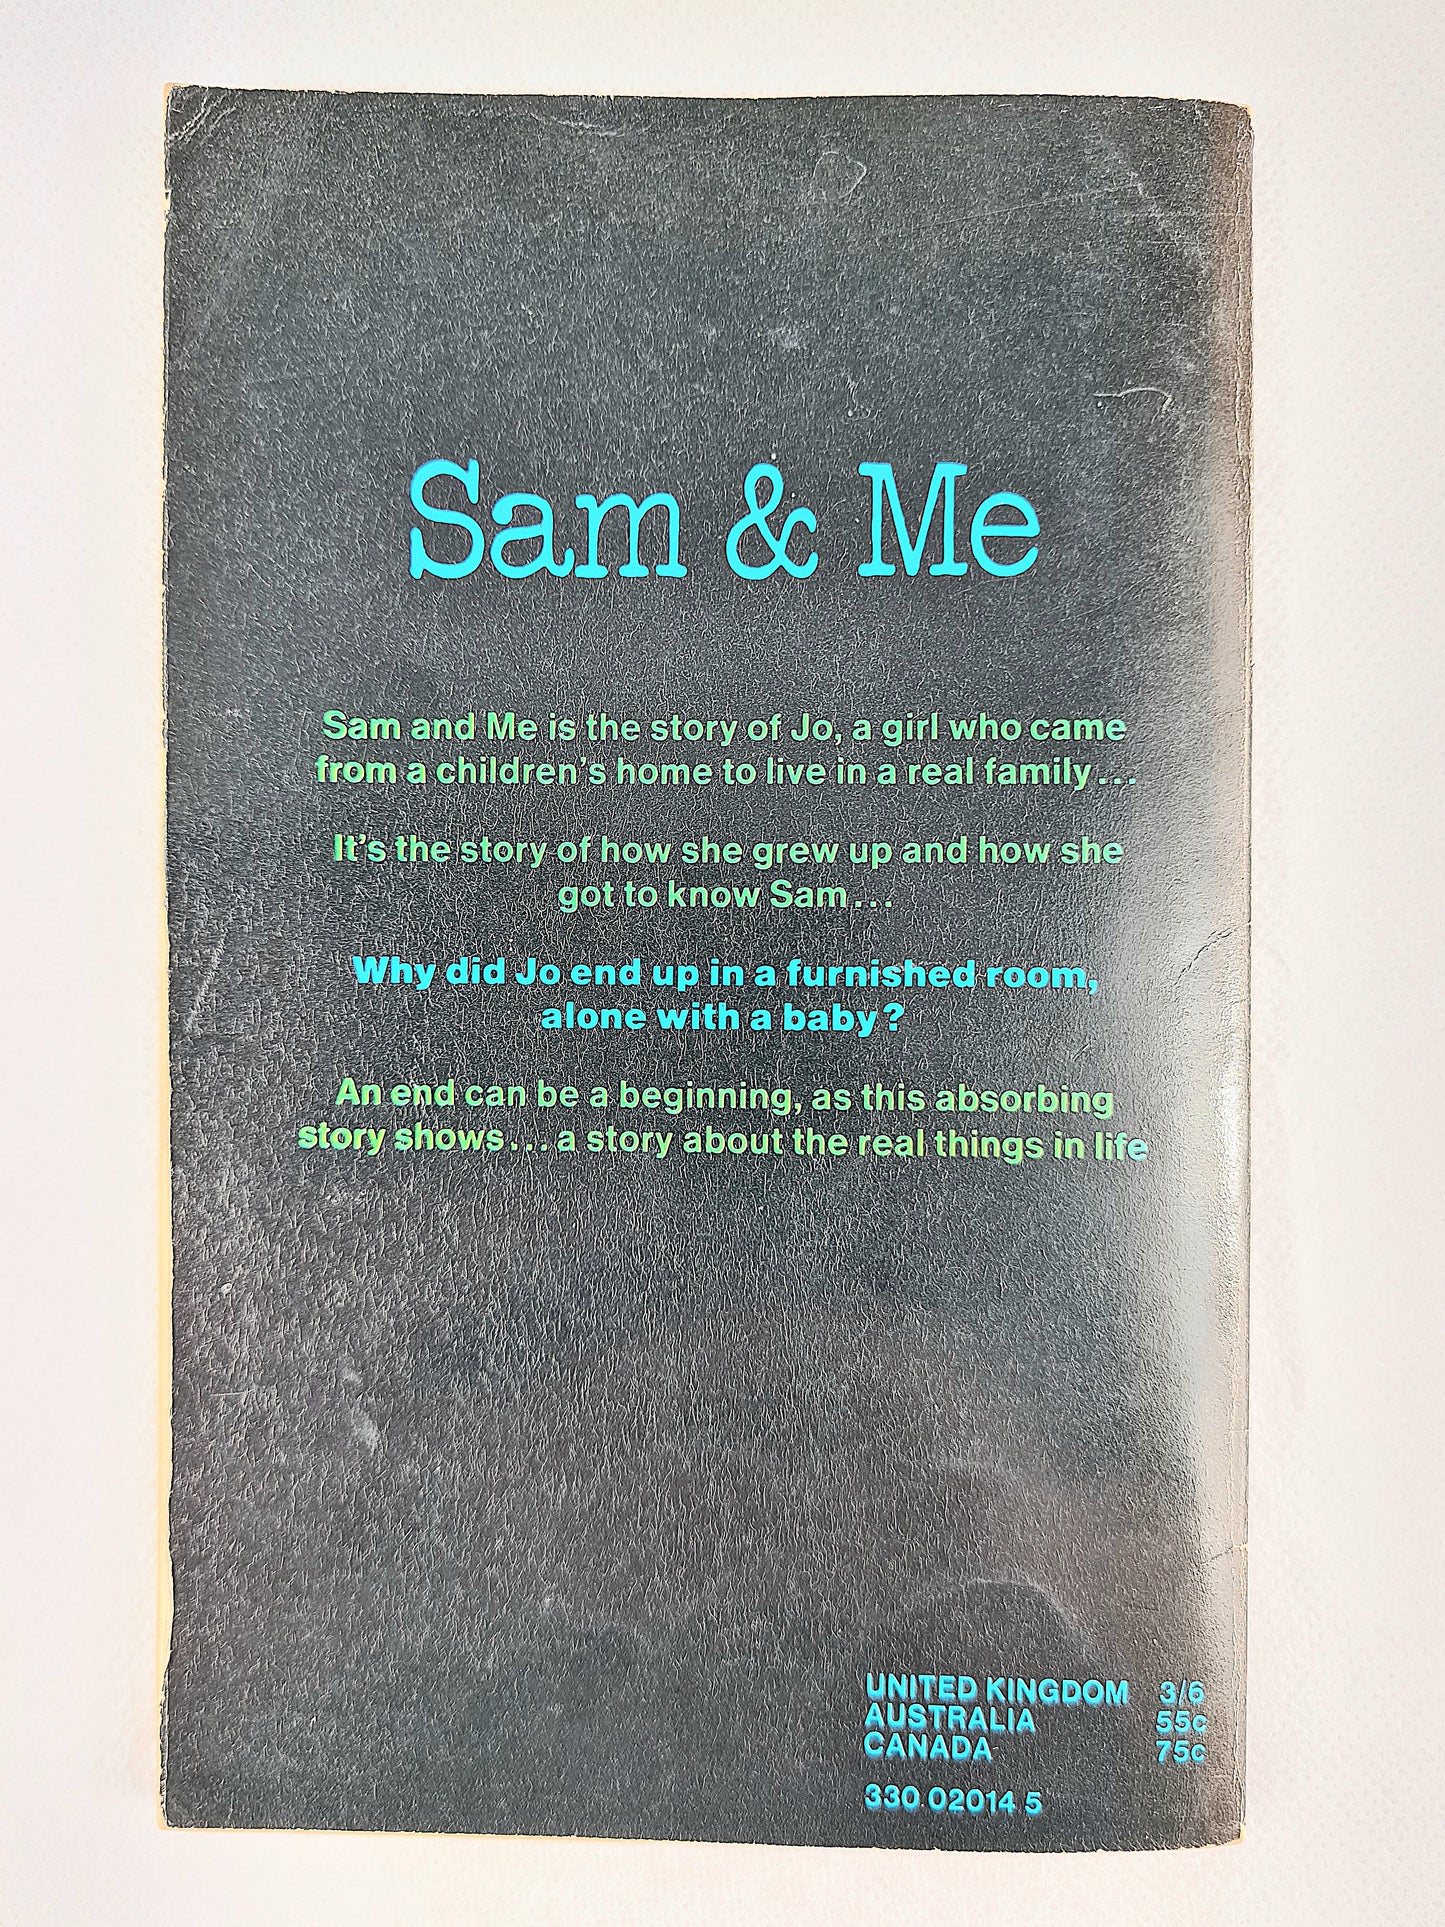 Sam and Me by Joan Tate. Vintage paperback books. Pan books